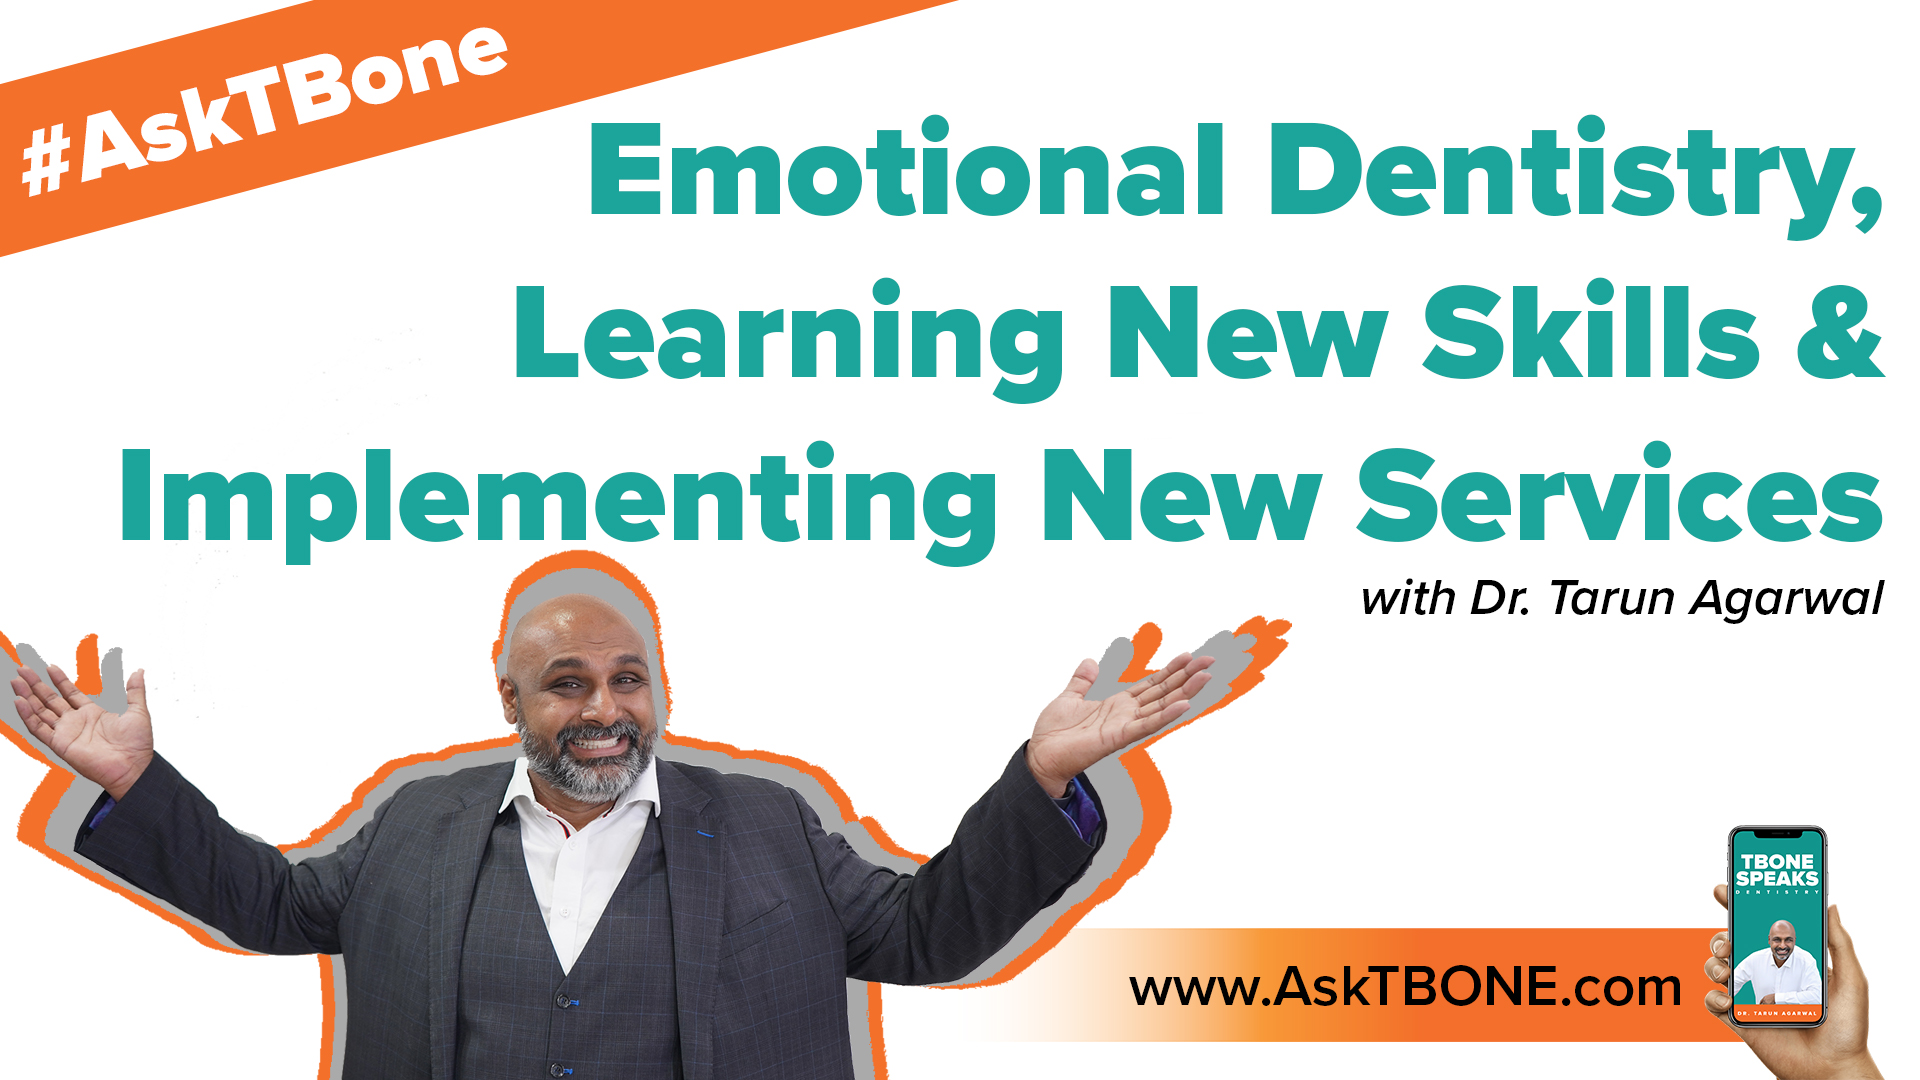 Emotional Dentistry, Learning New Skills & Implementing New Services